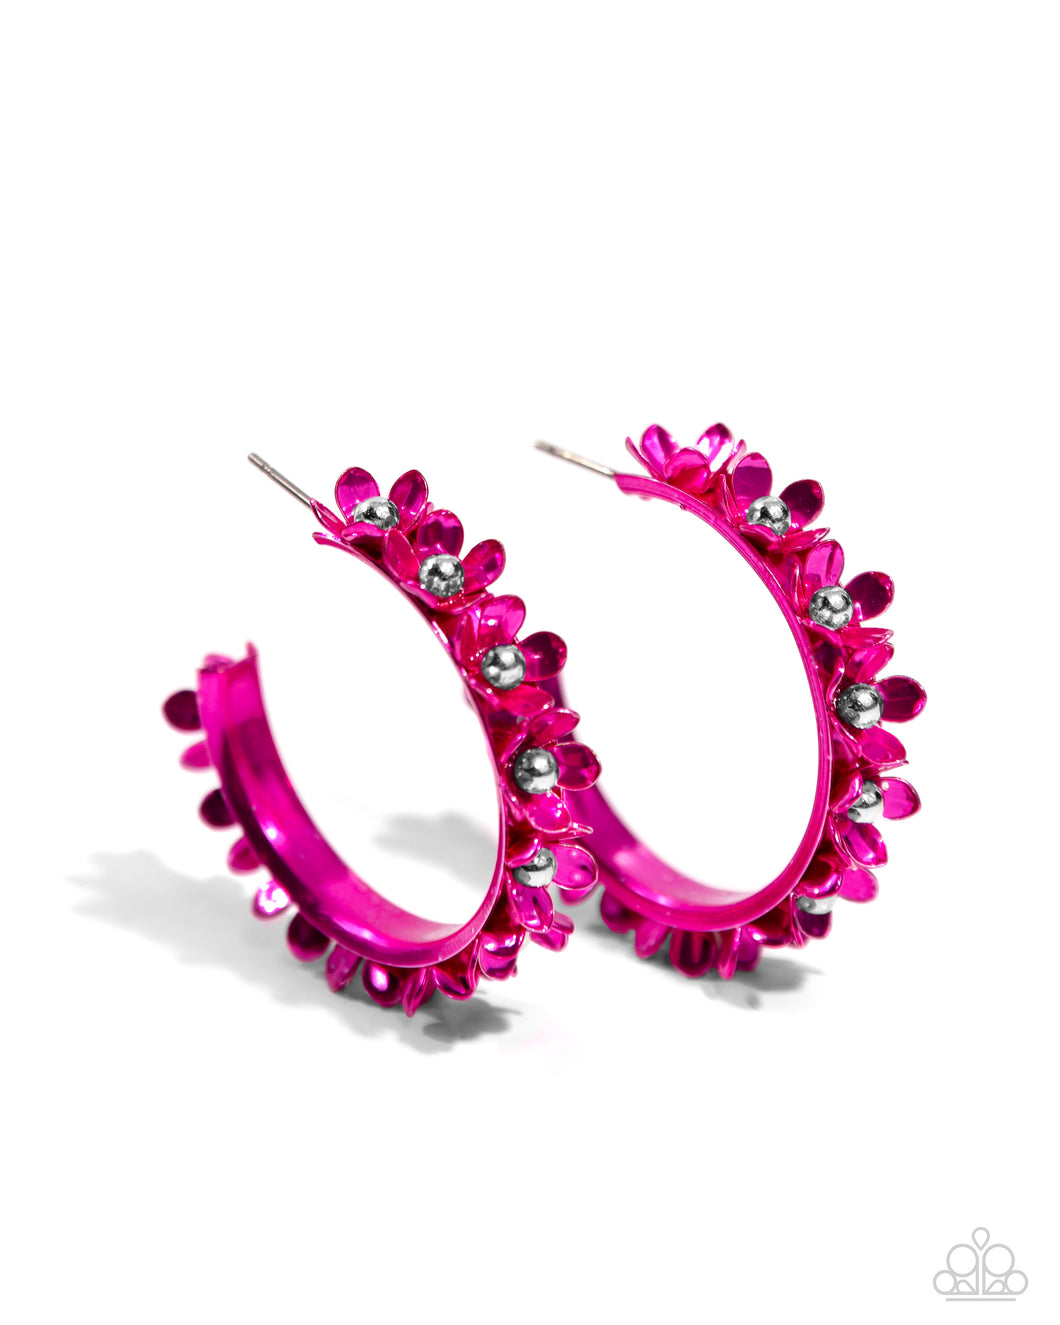 Fashionable Flower Crown - Pink Earring